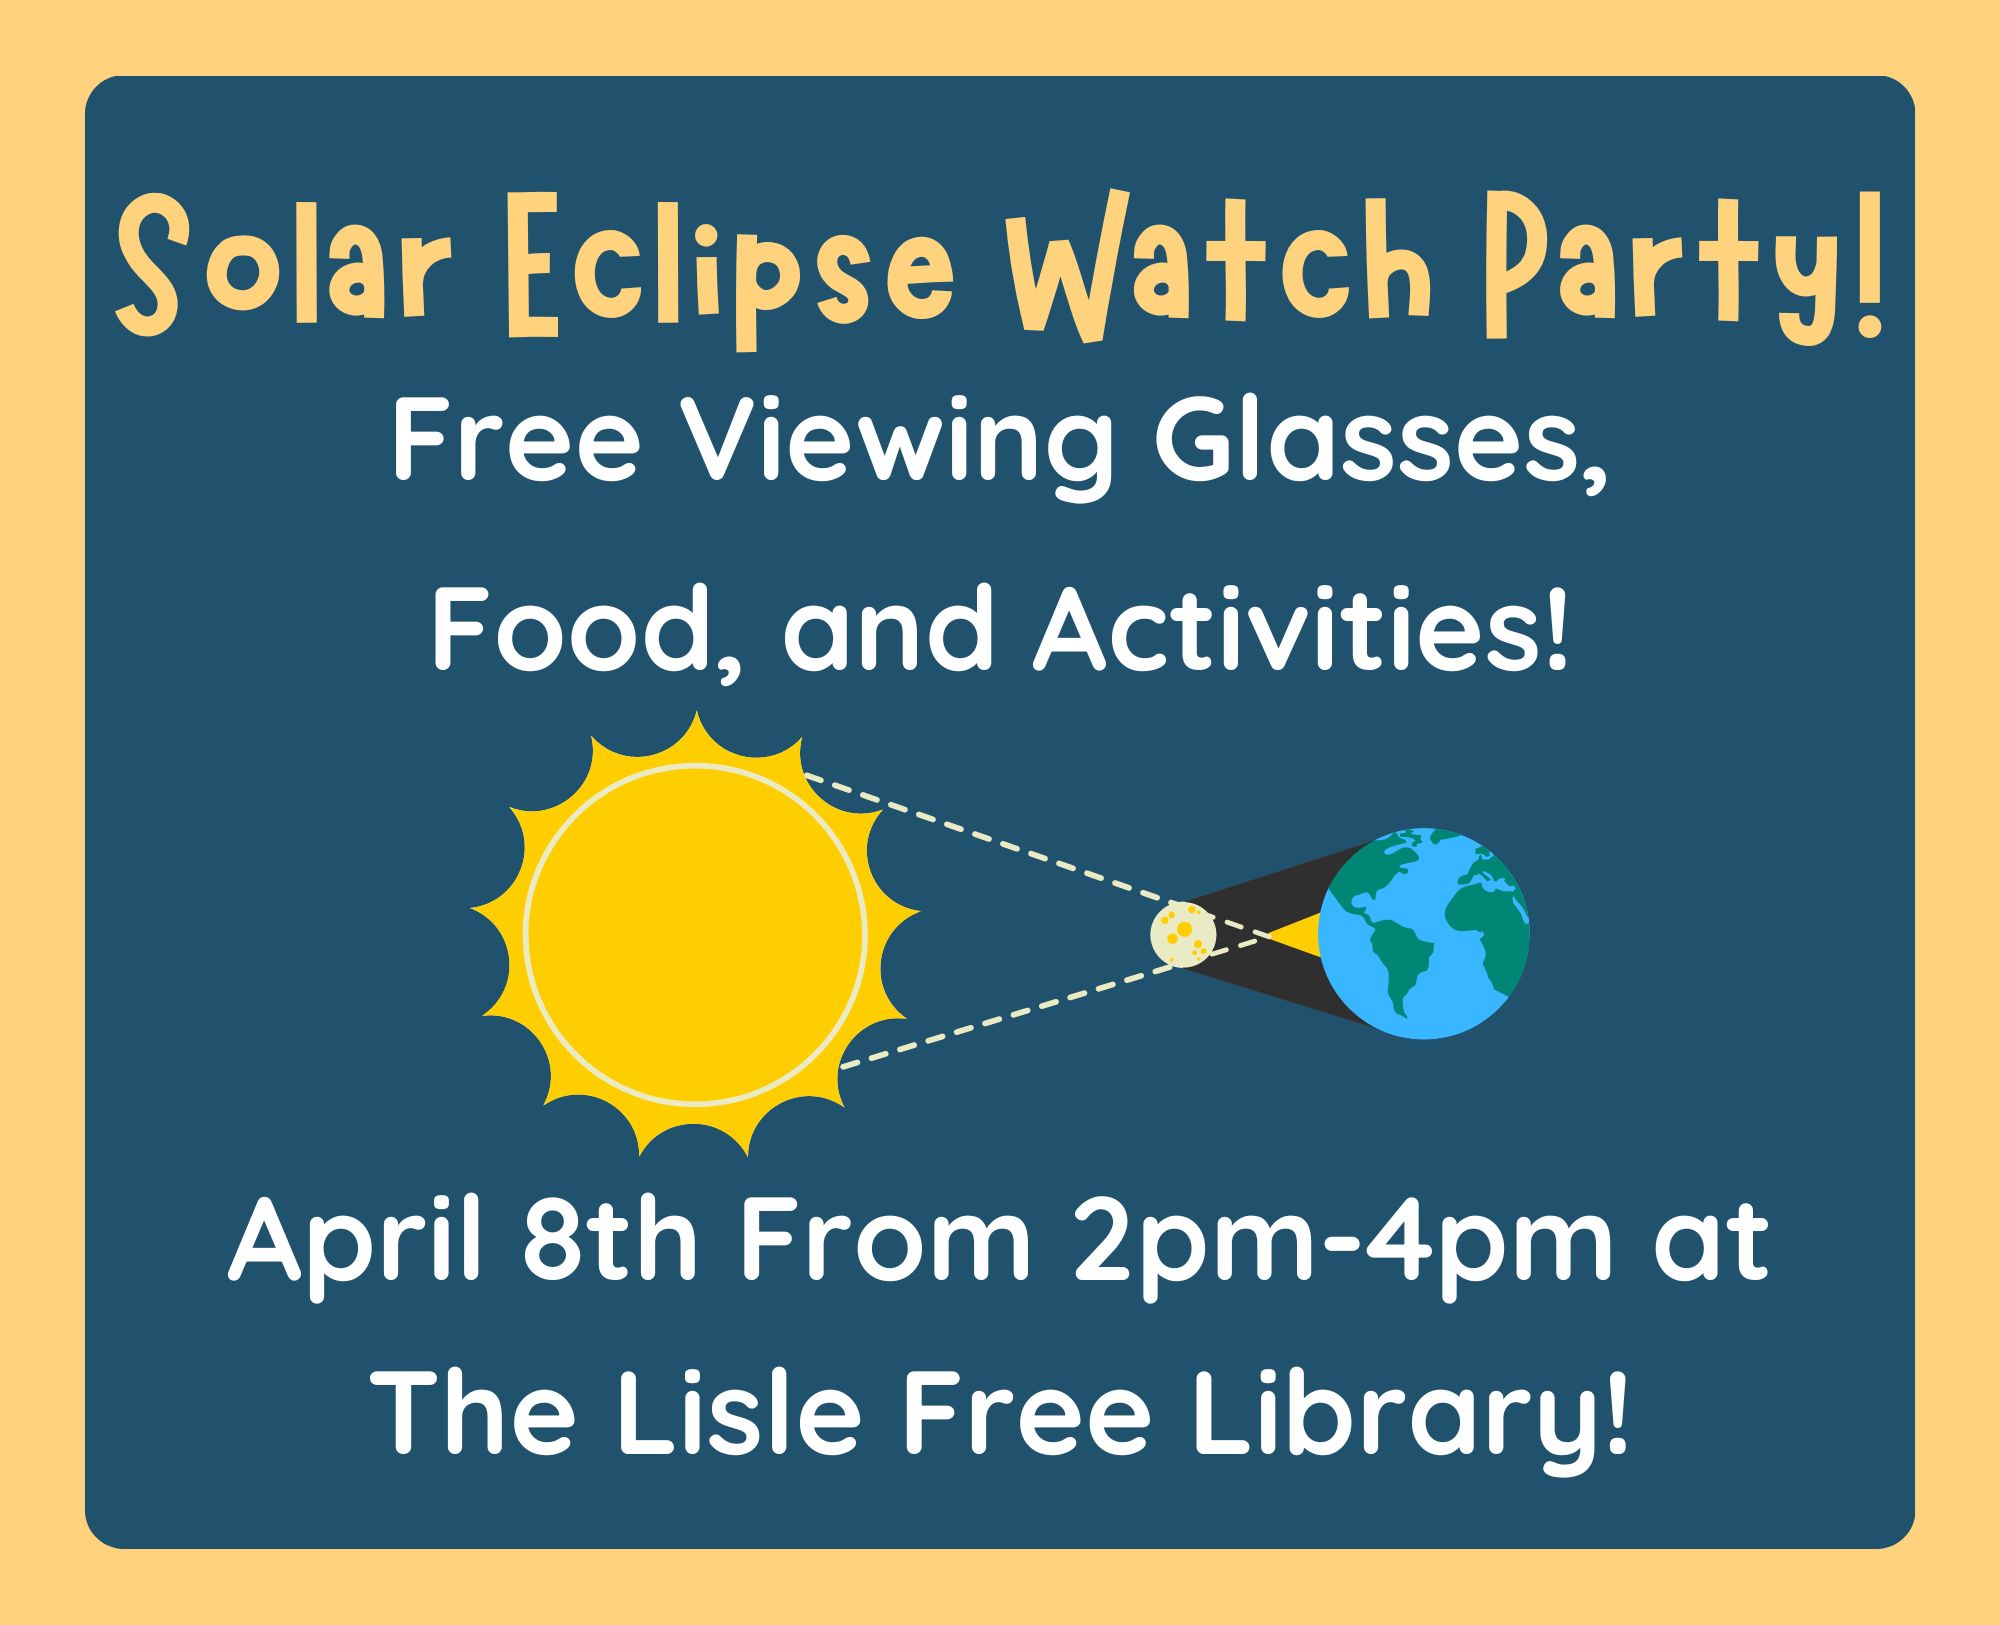 Solar Eclipse Watch Party